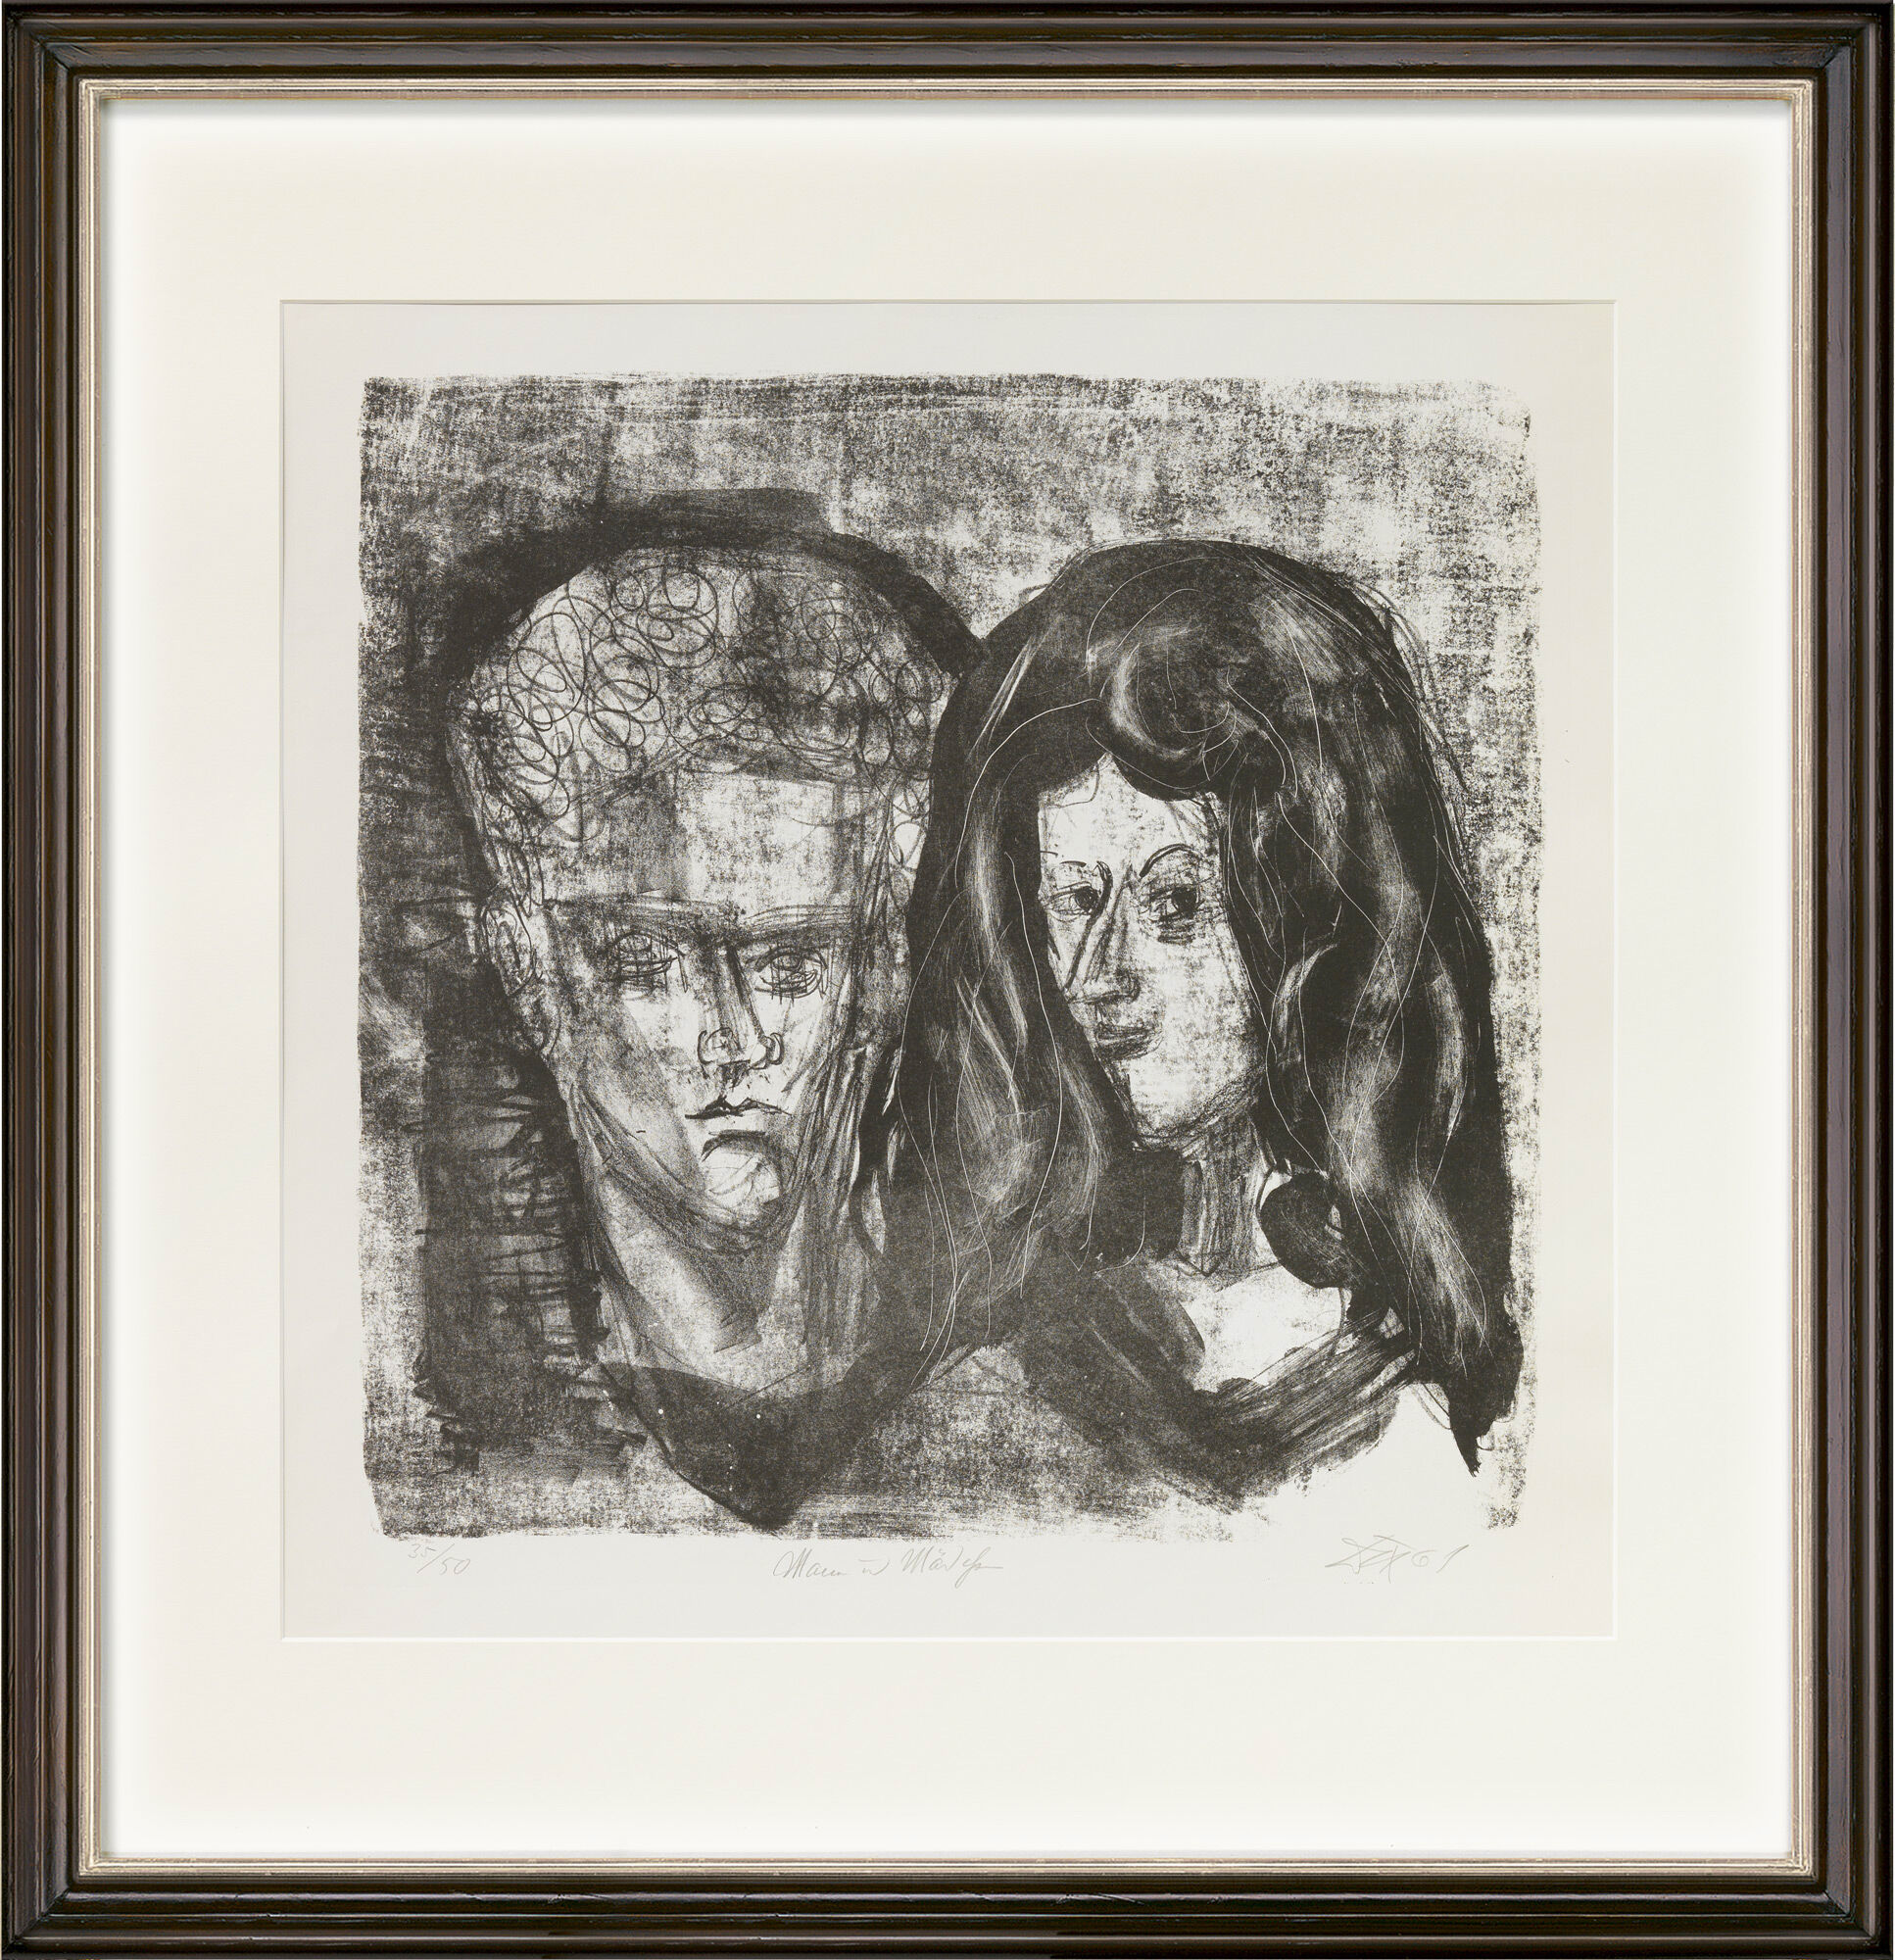 Picture "Man and Girl" (1961) by Otto Dix